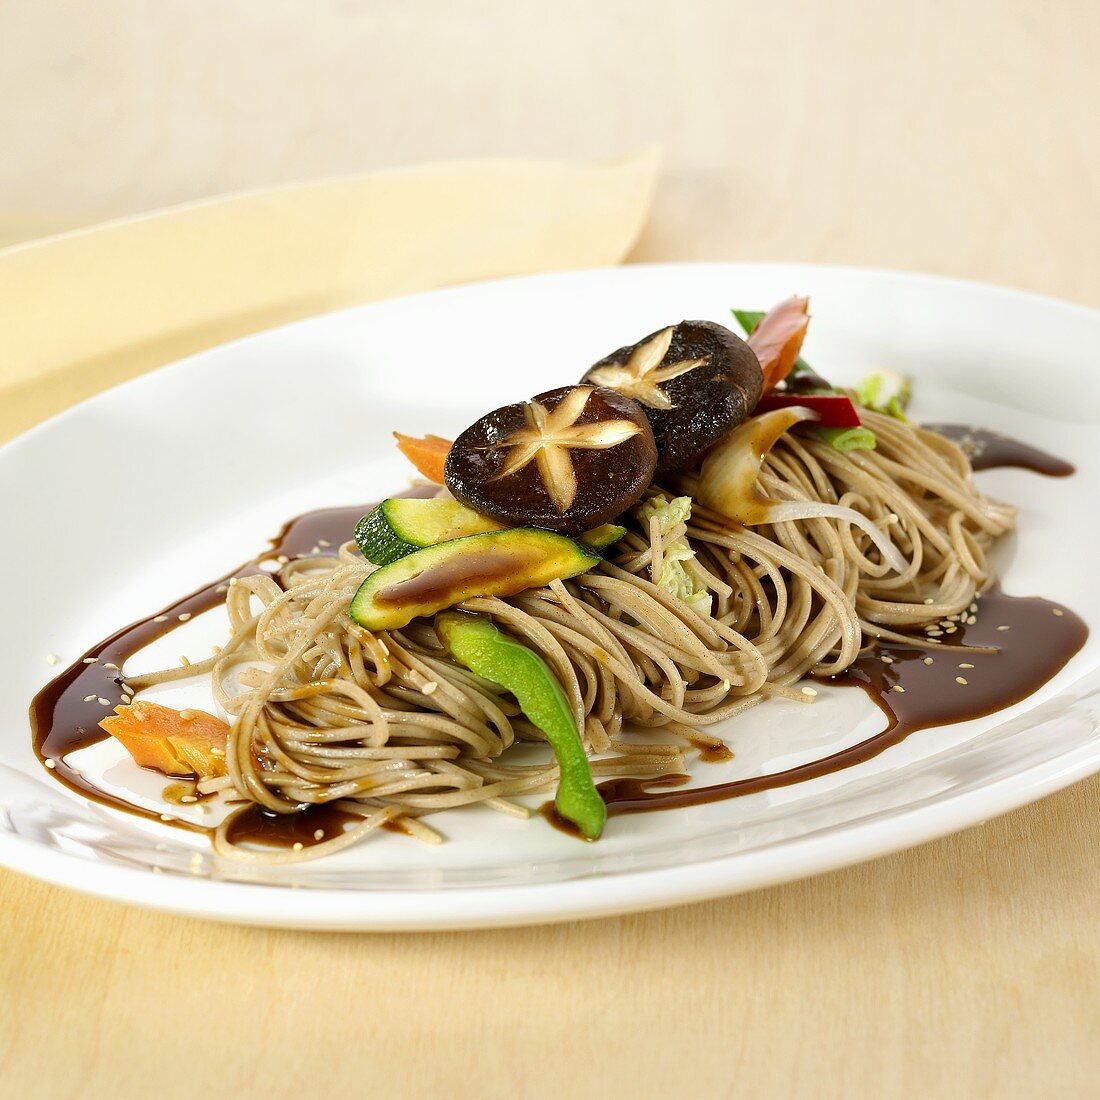 Soba noodles with vegetables and soy sauce